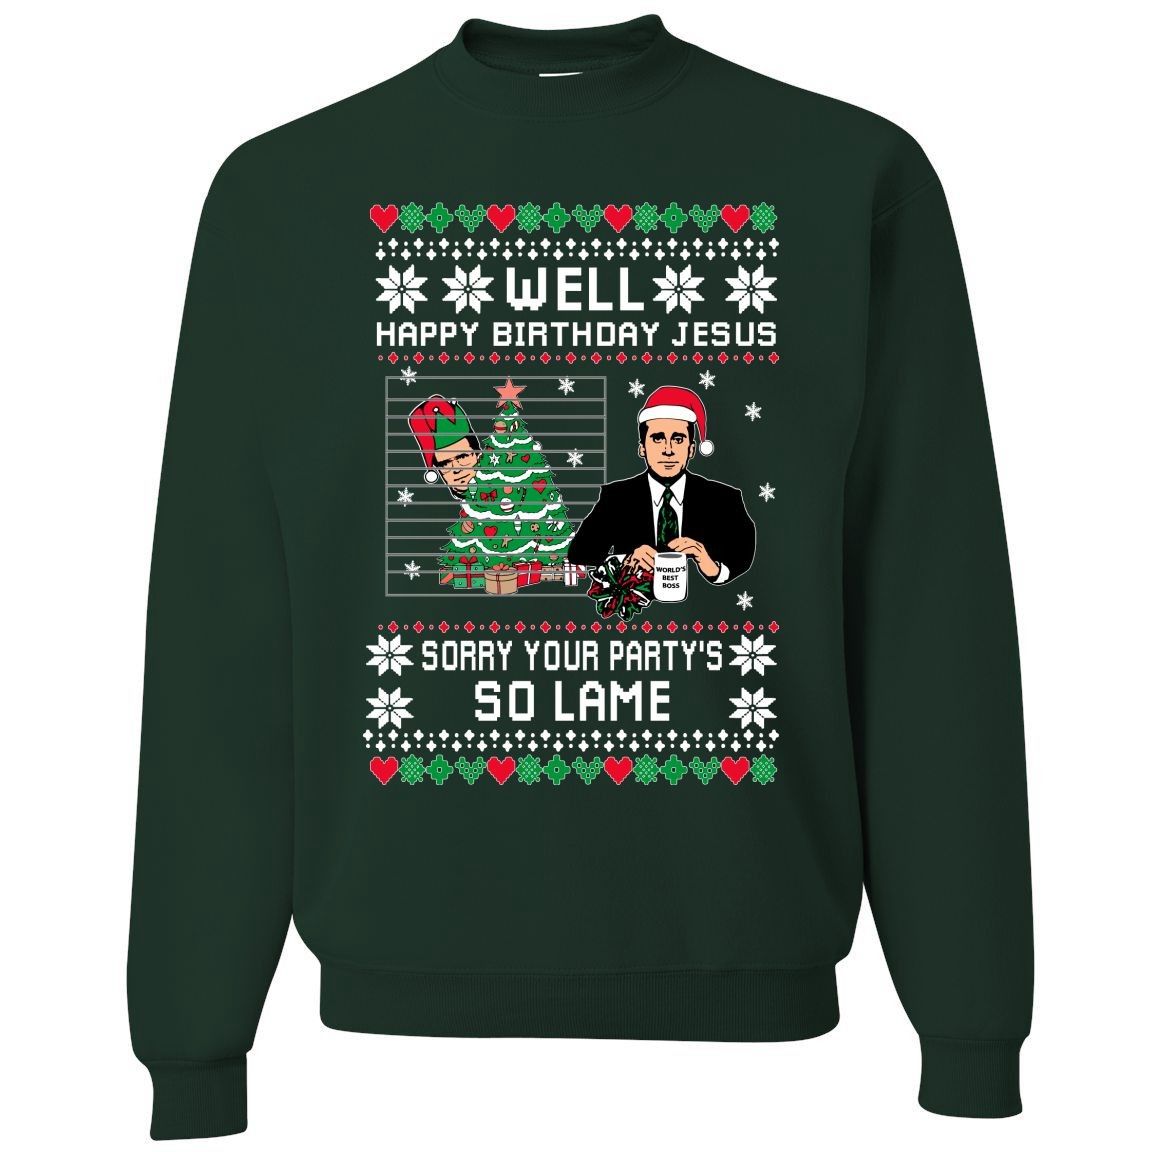 Sorry Your Party’s So Lame – The Office – Crew Neck Sweatshirt (Unisex)